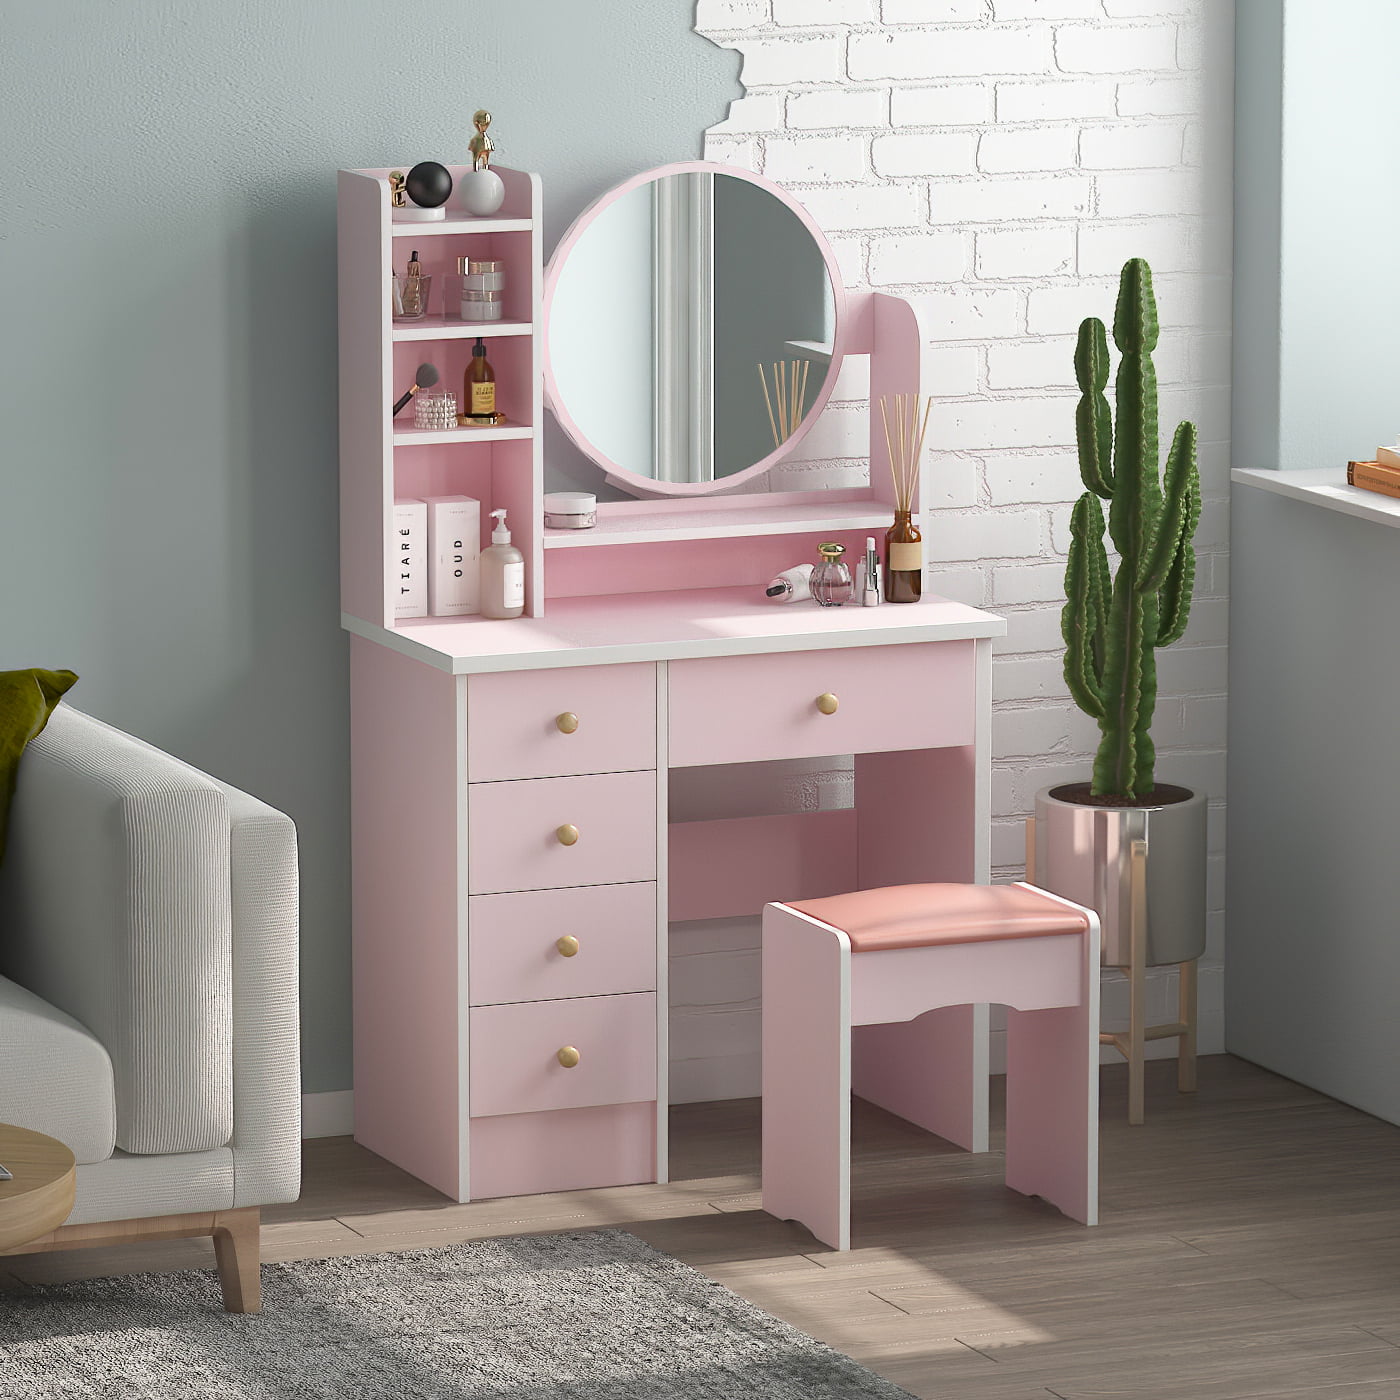 Multifunctional Computer Hutches, Vanity Set Dressing Table with Mirror and 5 Drawers for Bedroom, White Walmart.com